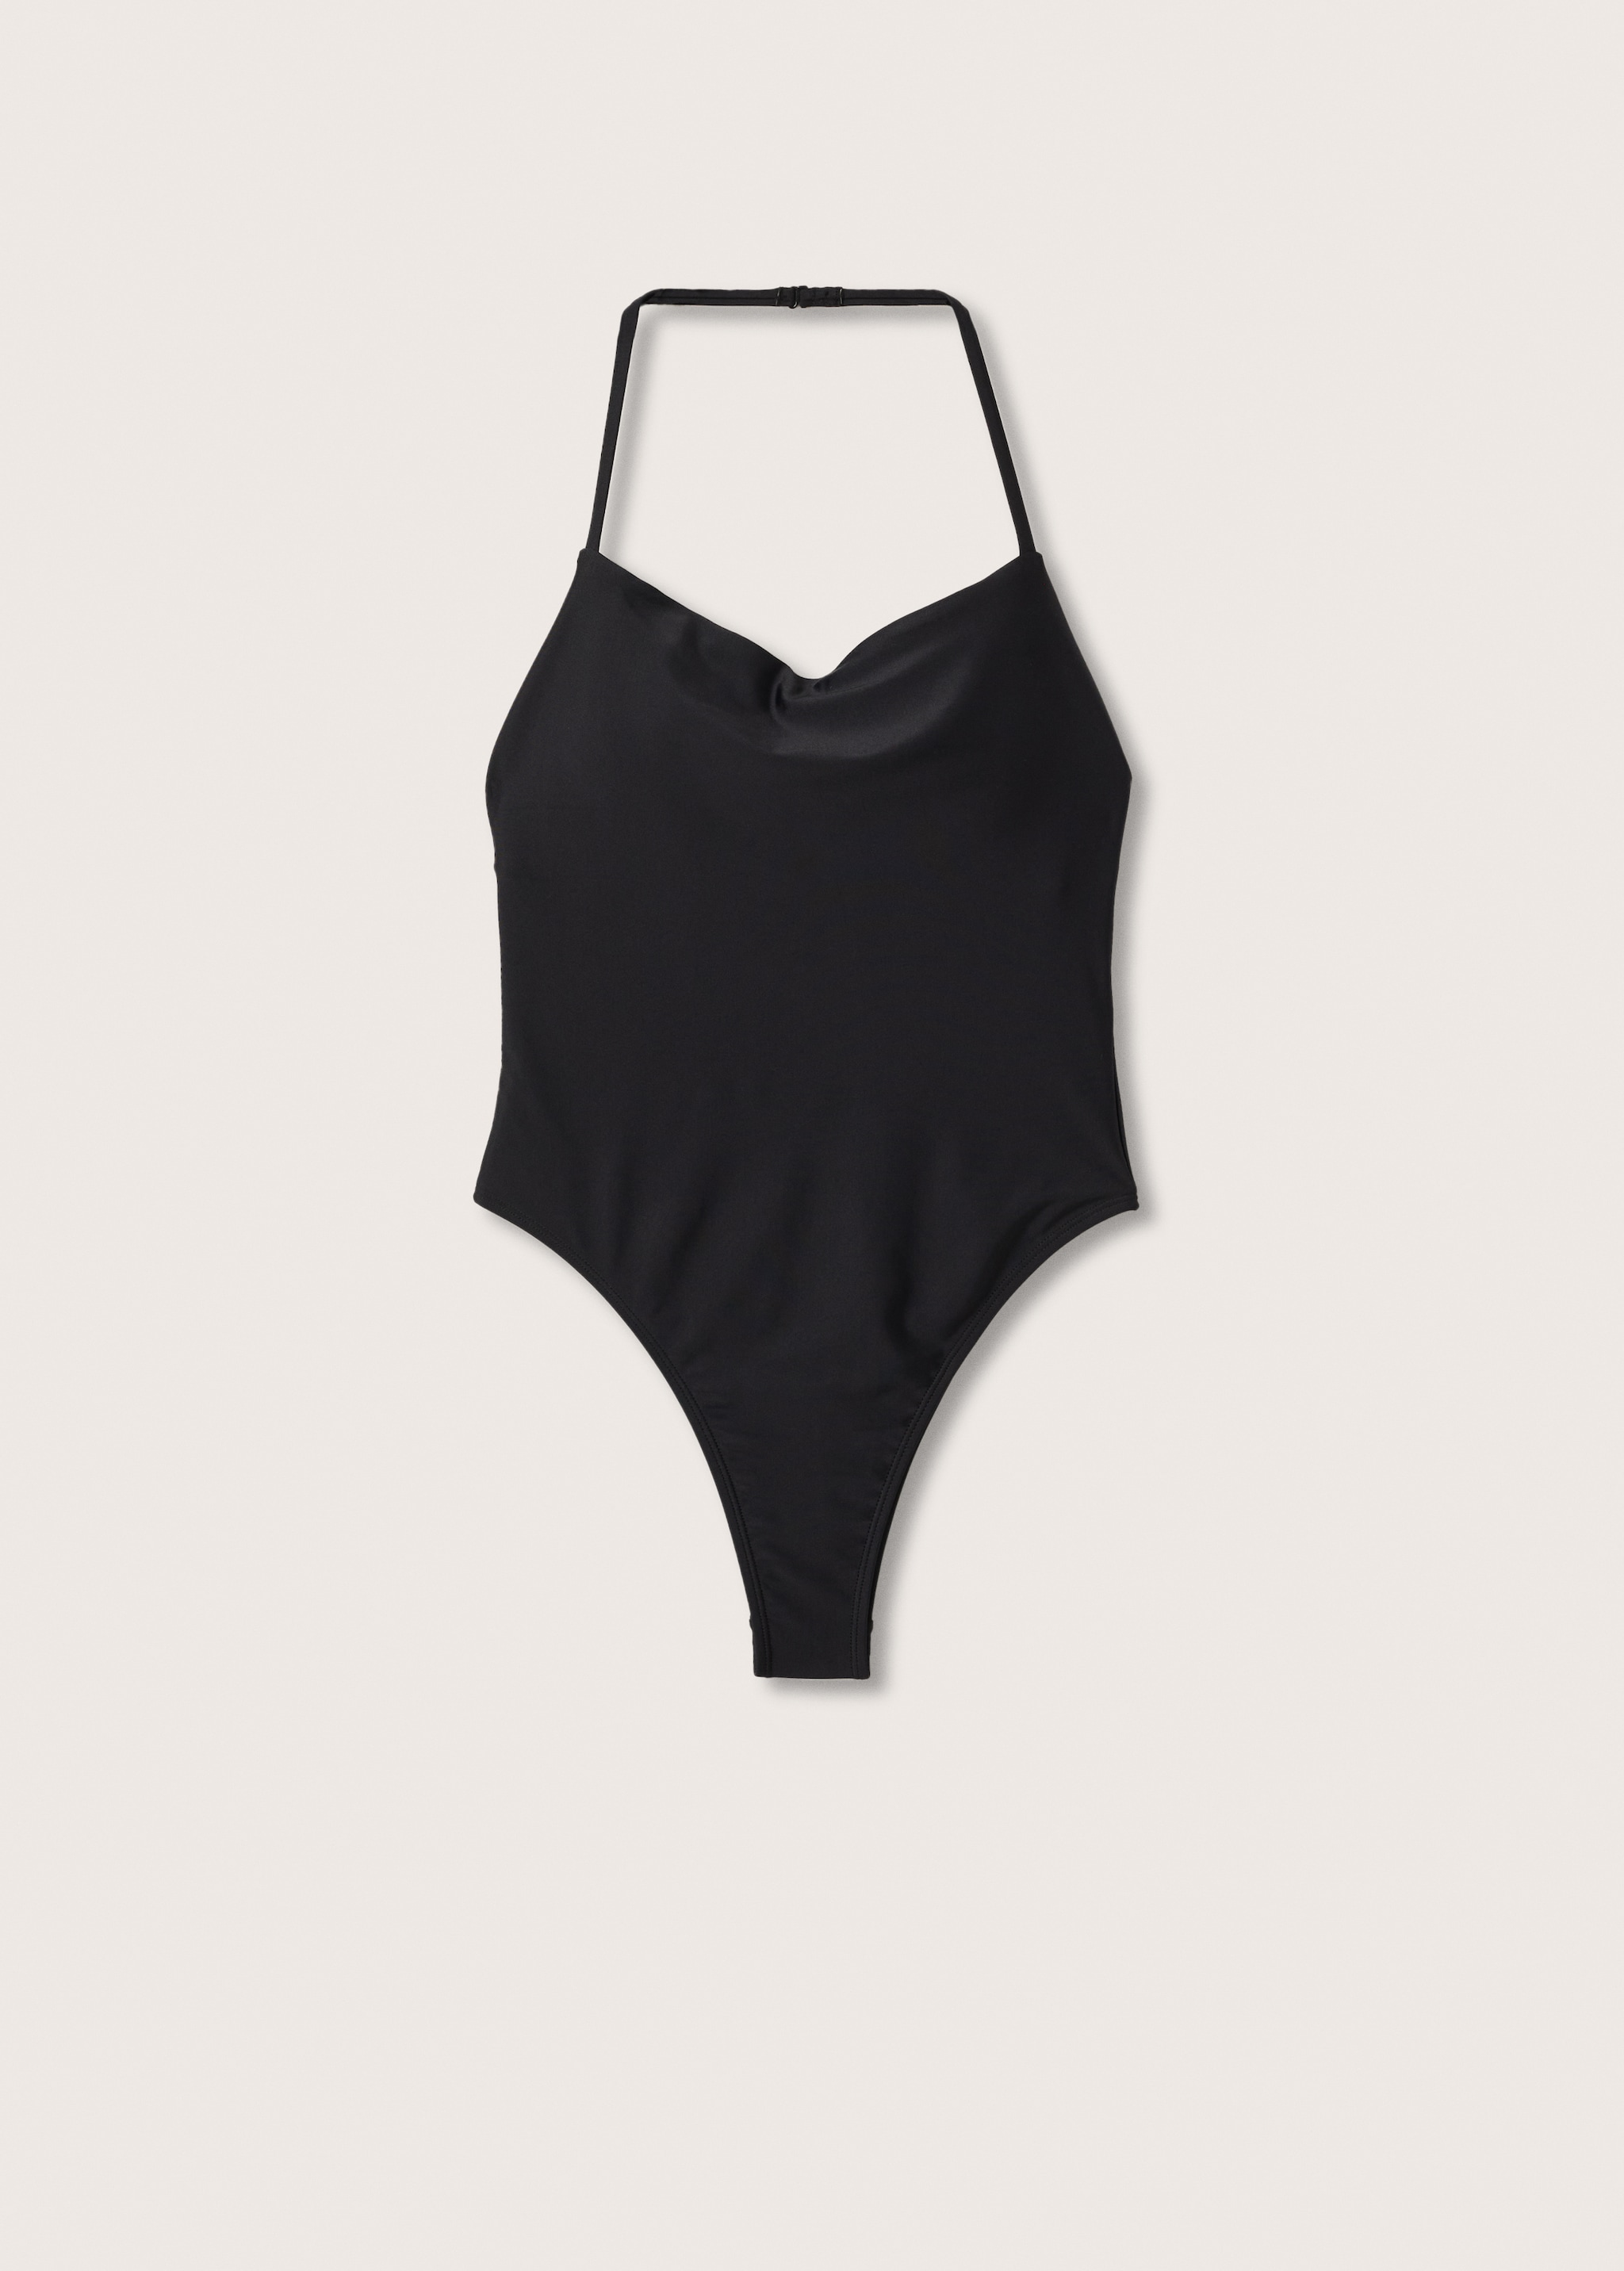 Open-back swimsuit - Article without model